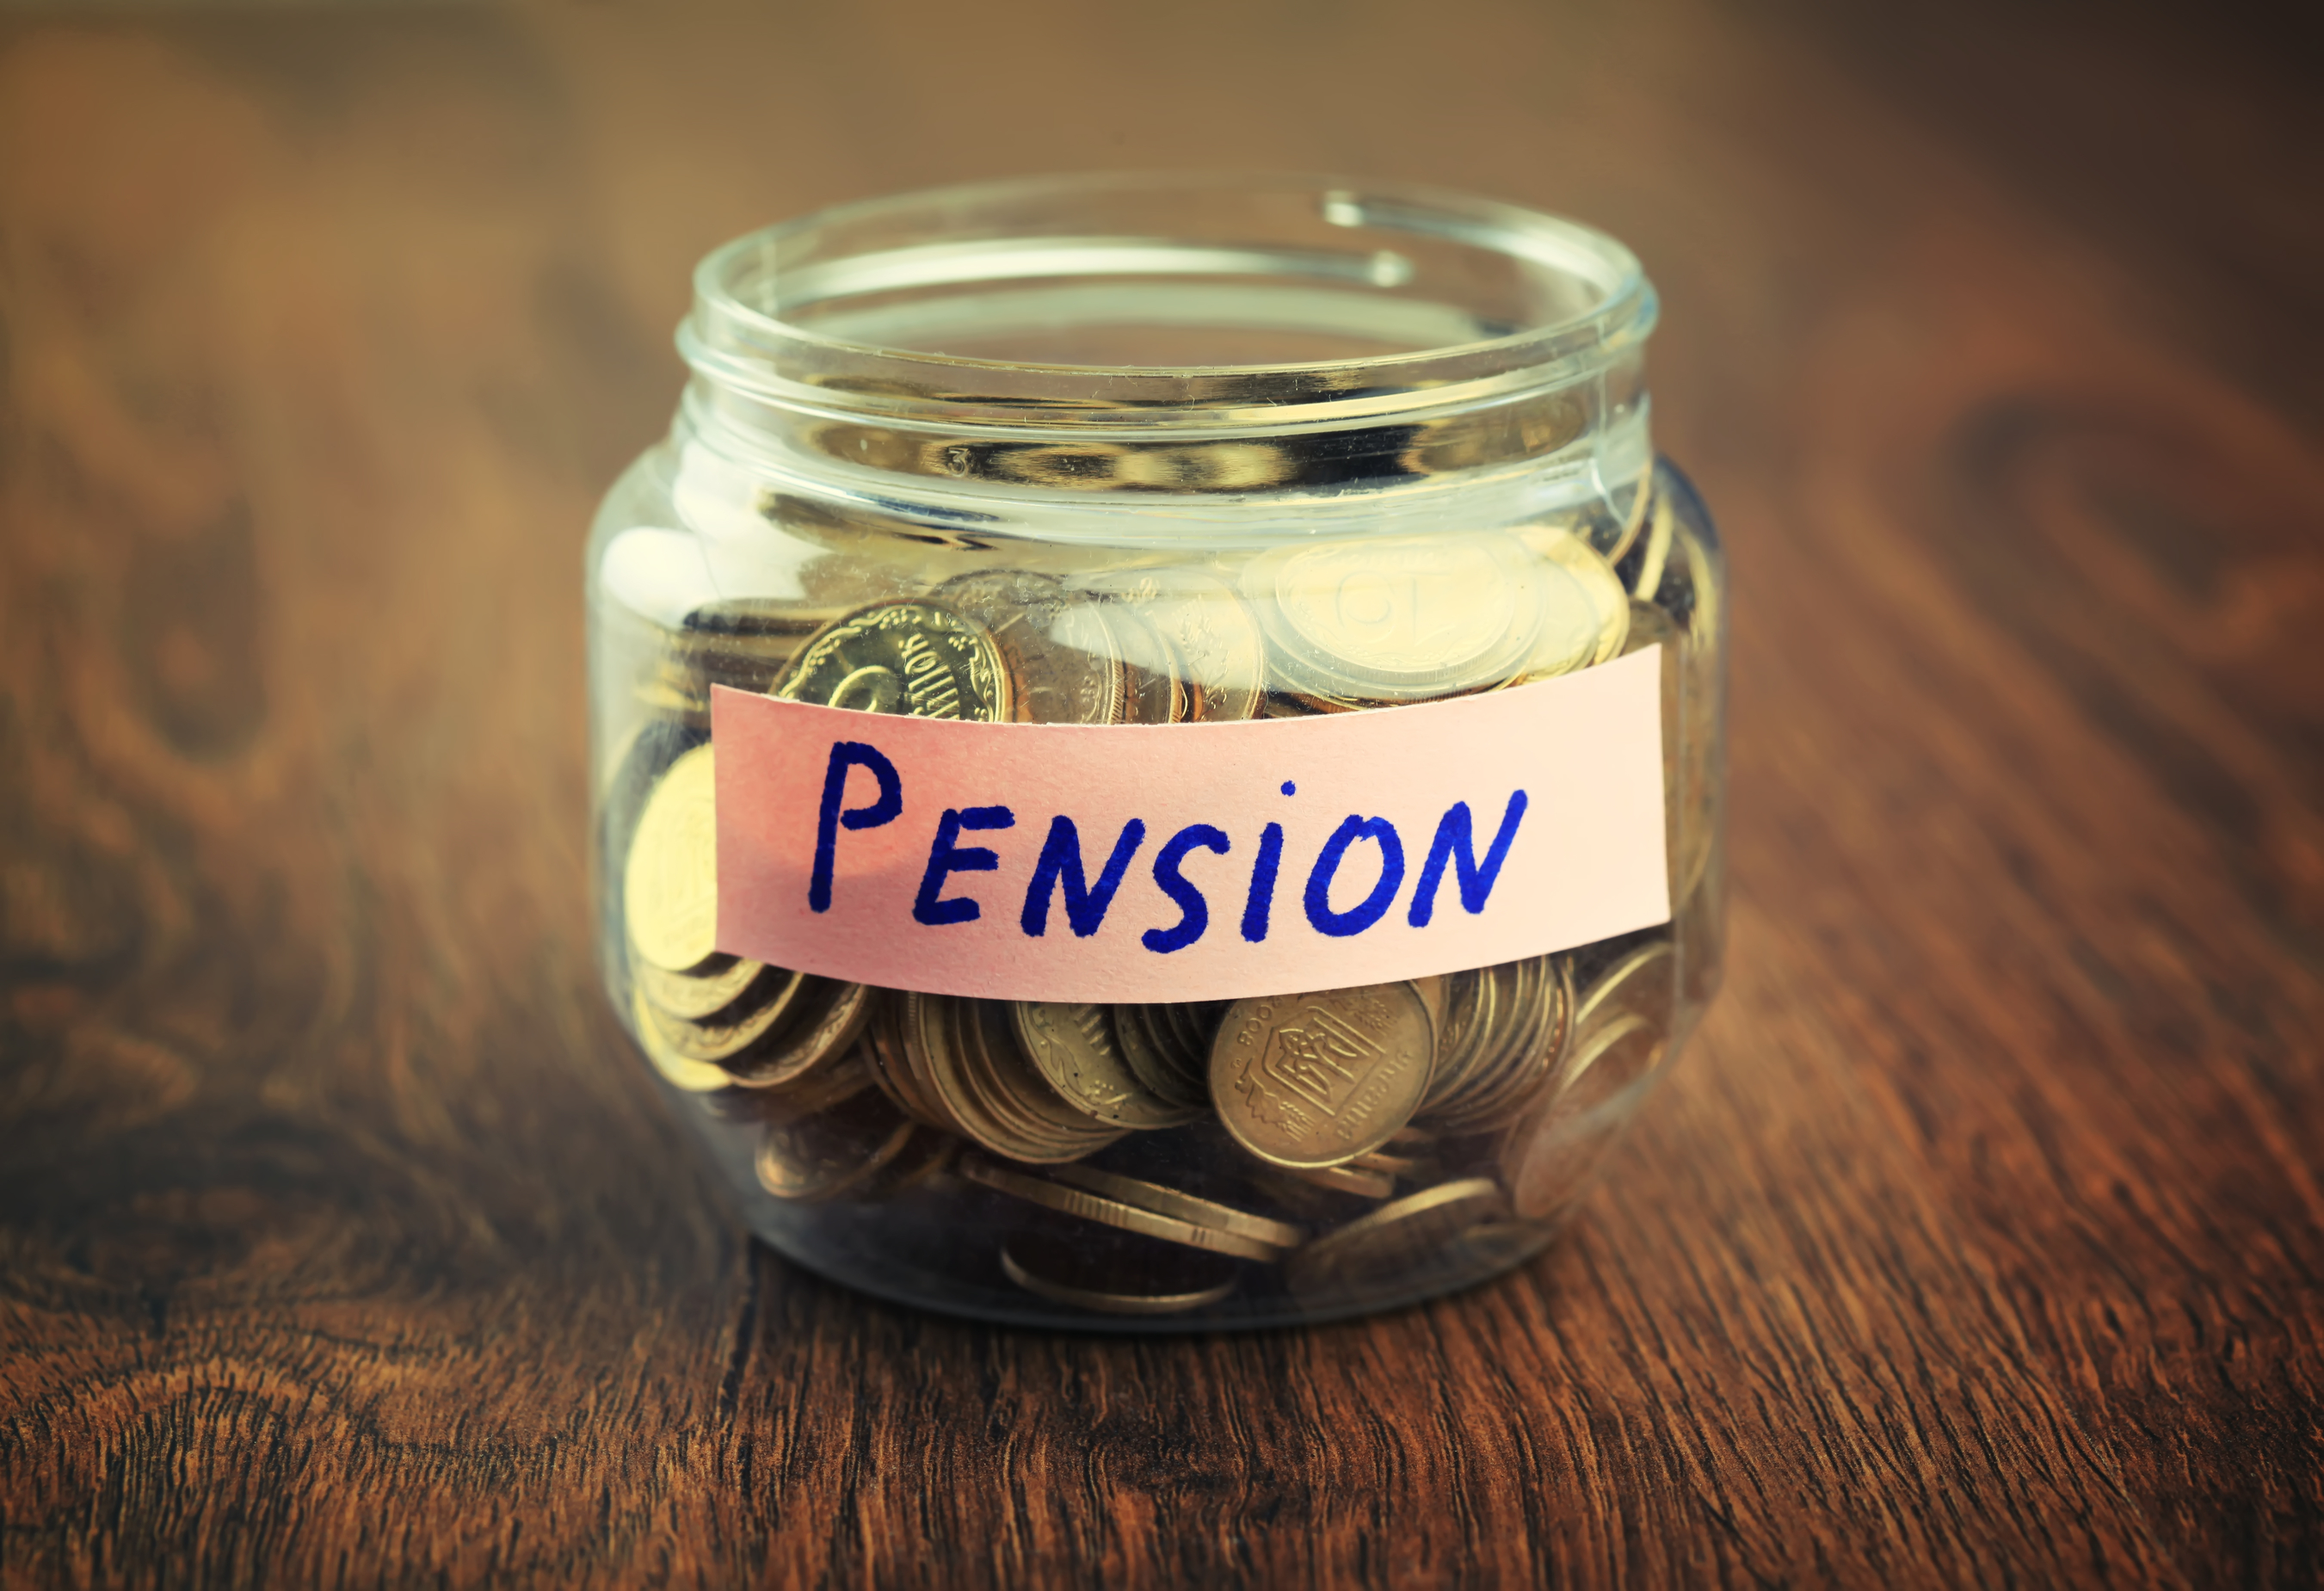 Public Pension Funding Remains Challenging, Despite Two-Year Streak of Healthy Investment Returns